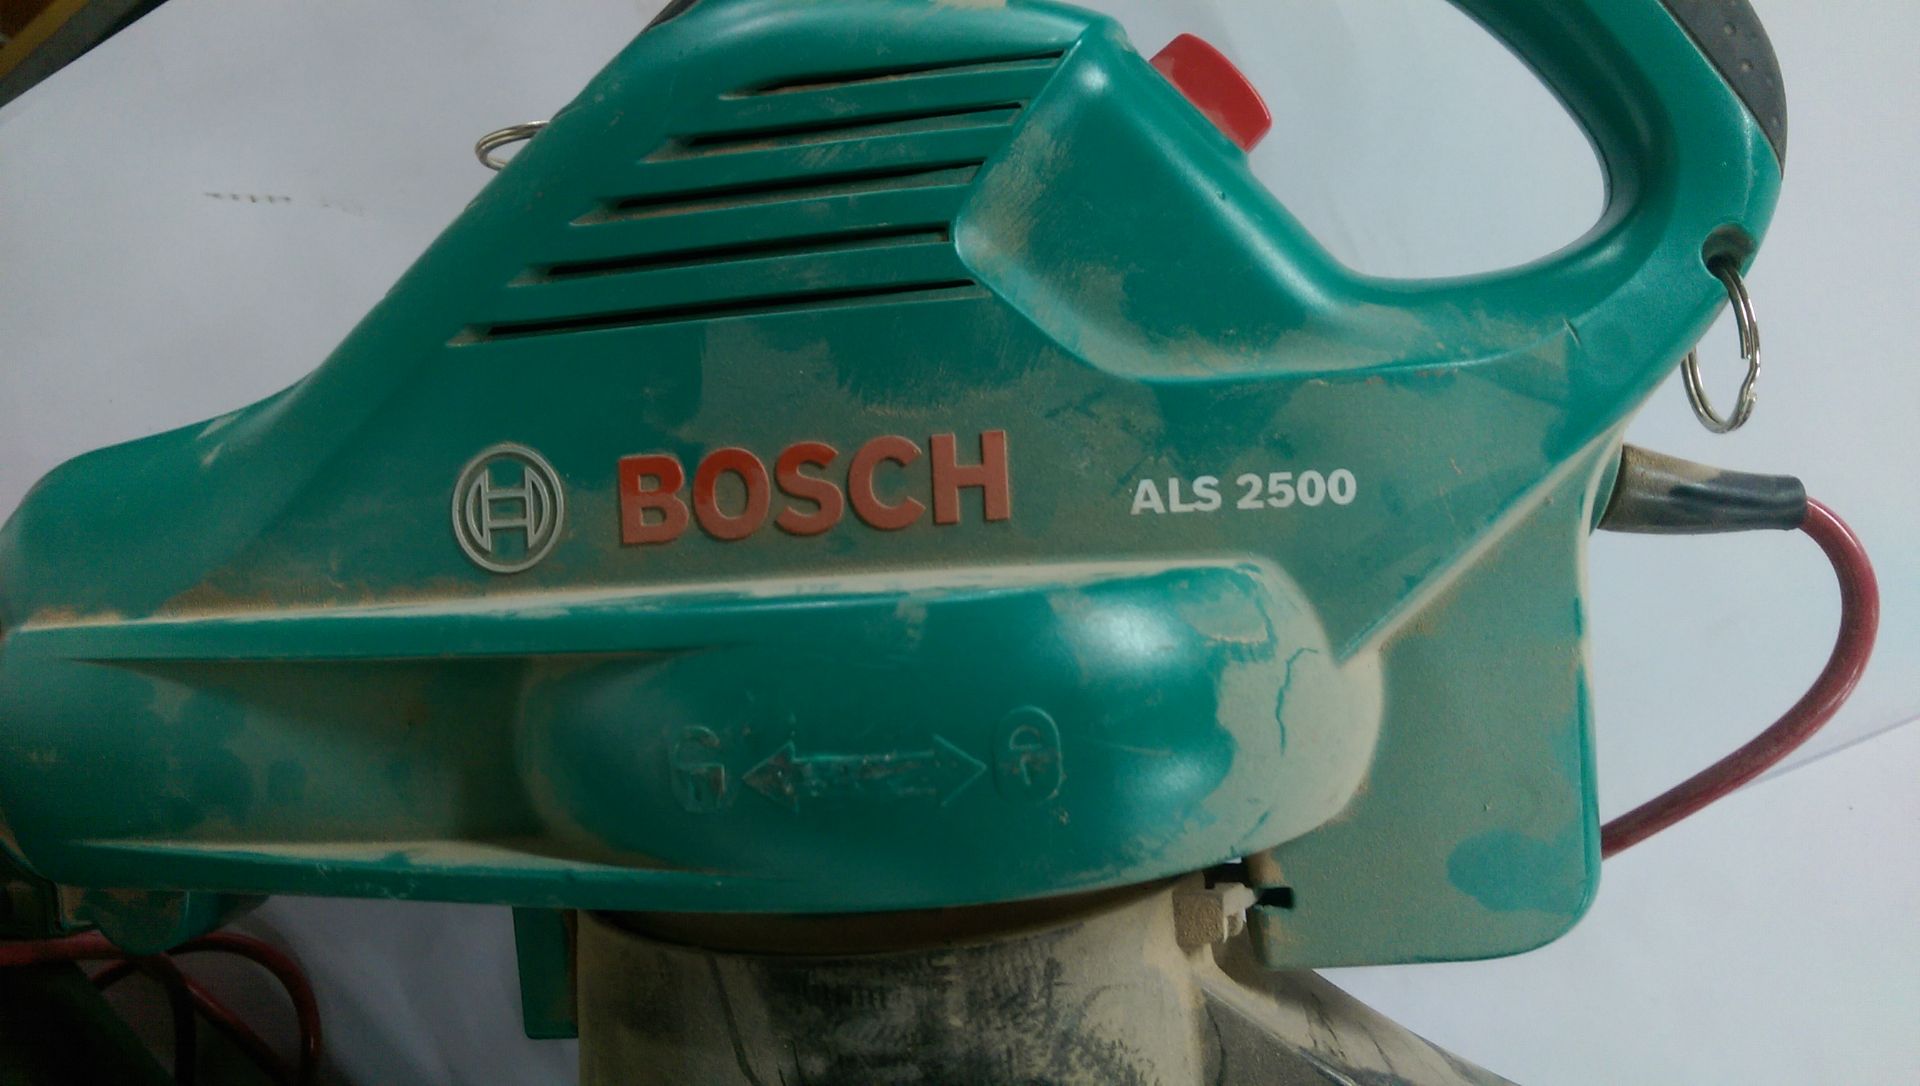 Bosch ALS 2500 Electric Garden Blower and Vacuum - Image 2 of 2